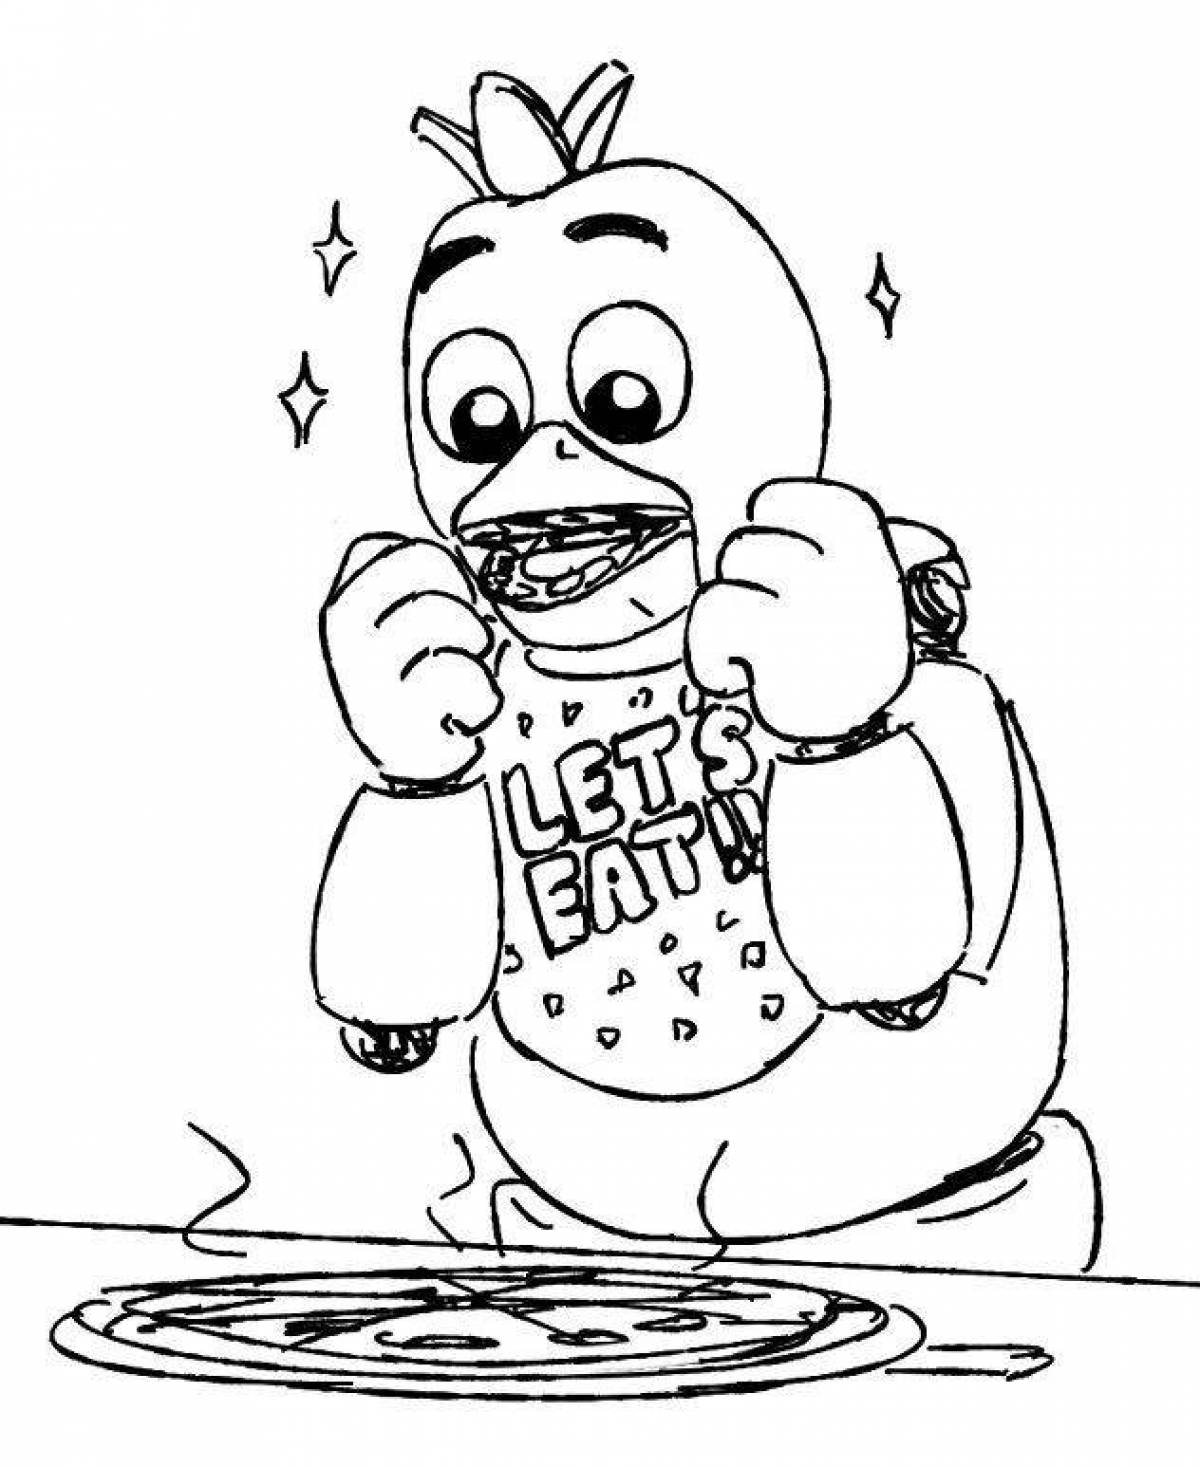 Delightful chica fnaf 9 coloring book